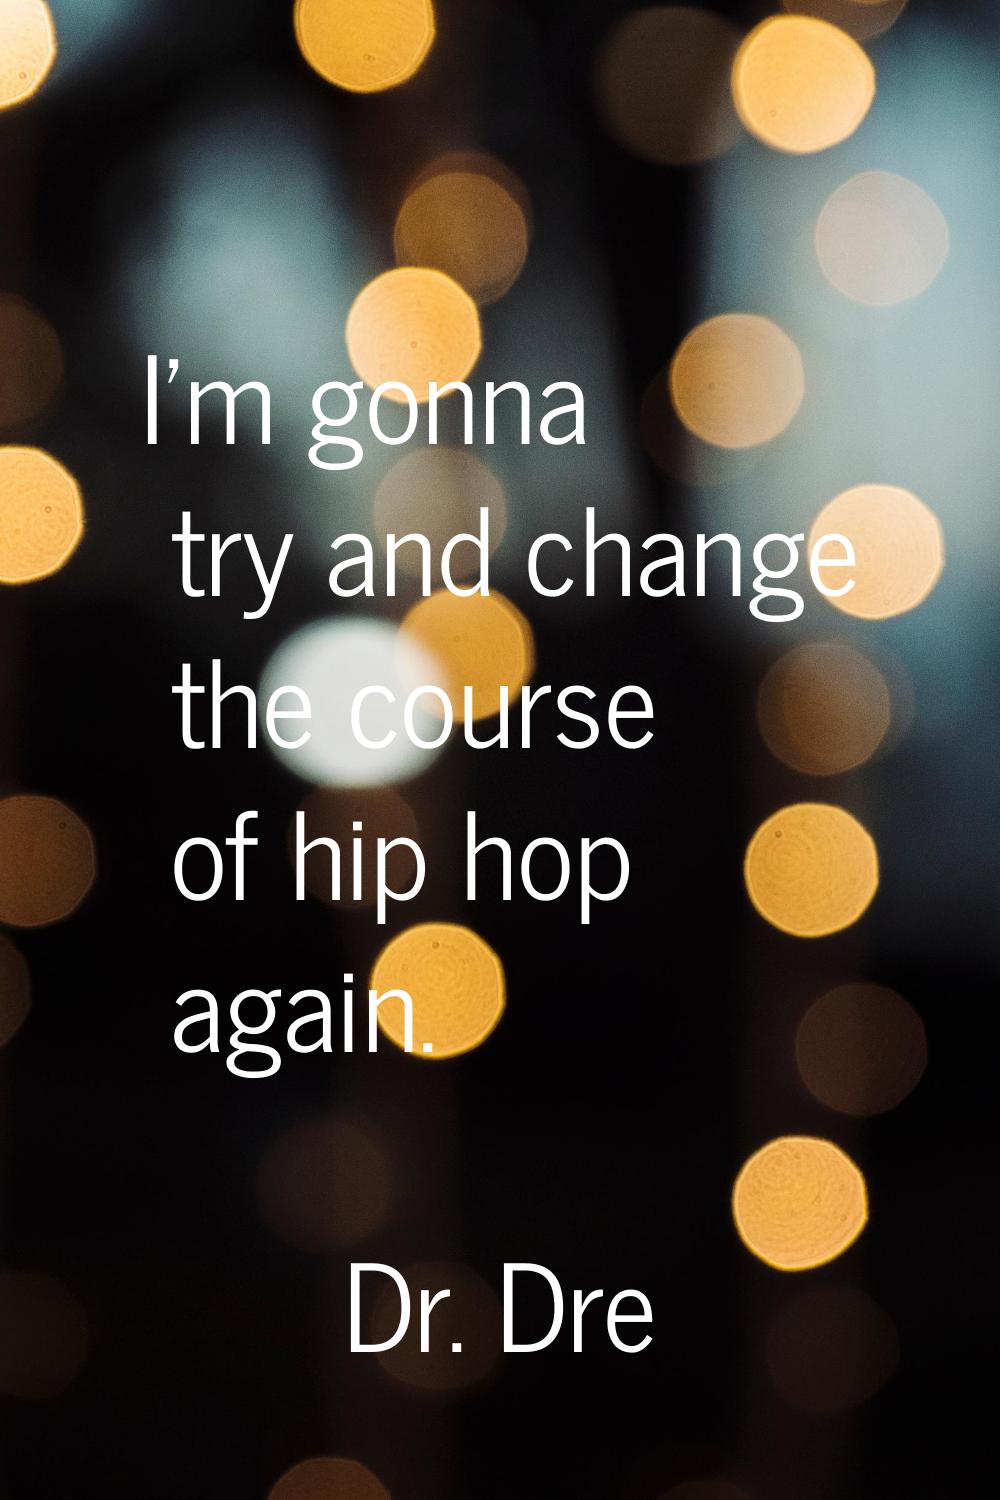 I'm gonna try and change the course of hip hop again.